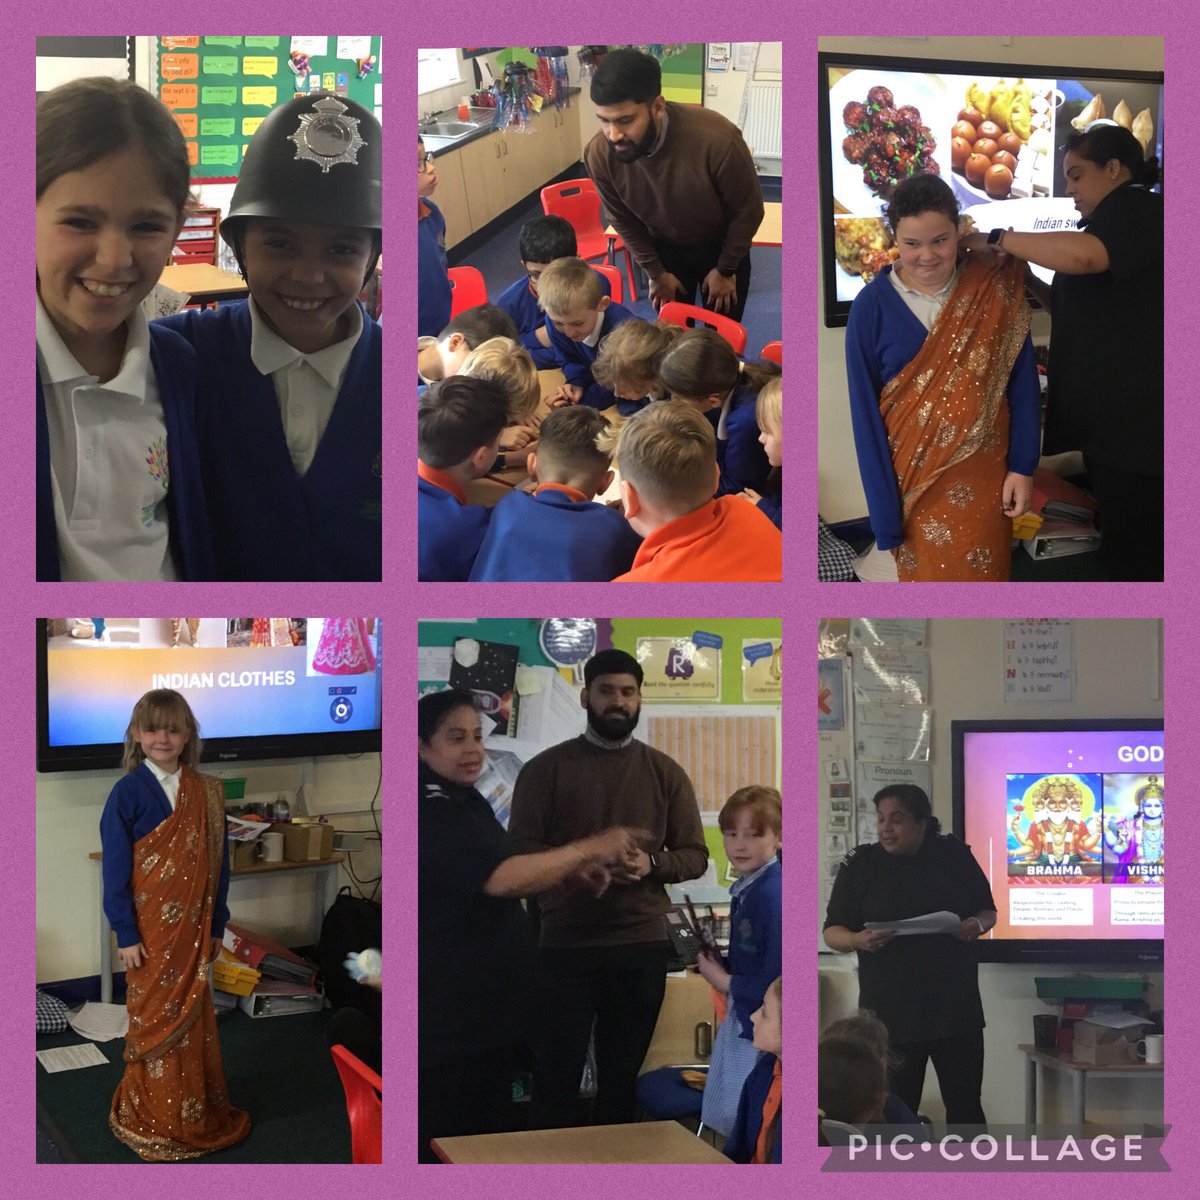 Hazel class were visited today by #southwalespolice. They learnt all about how the force accept, support & celebrate people of different faiths and beliefs. They looked at Hinduism in more depth and we joined in with traditional dance and dress. #ethicalinformedcitizens #swbpa